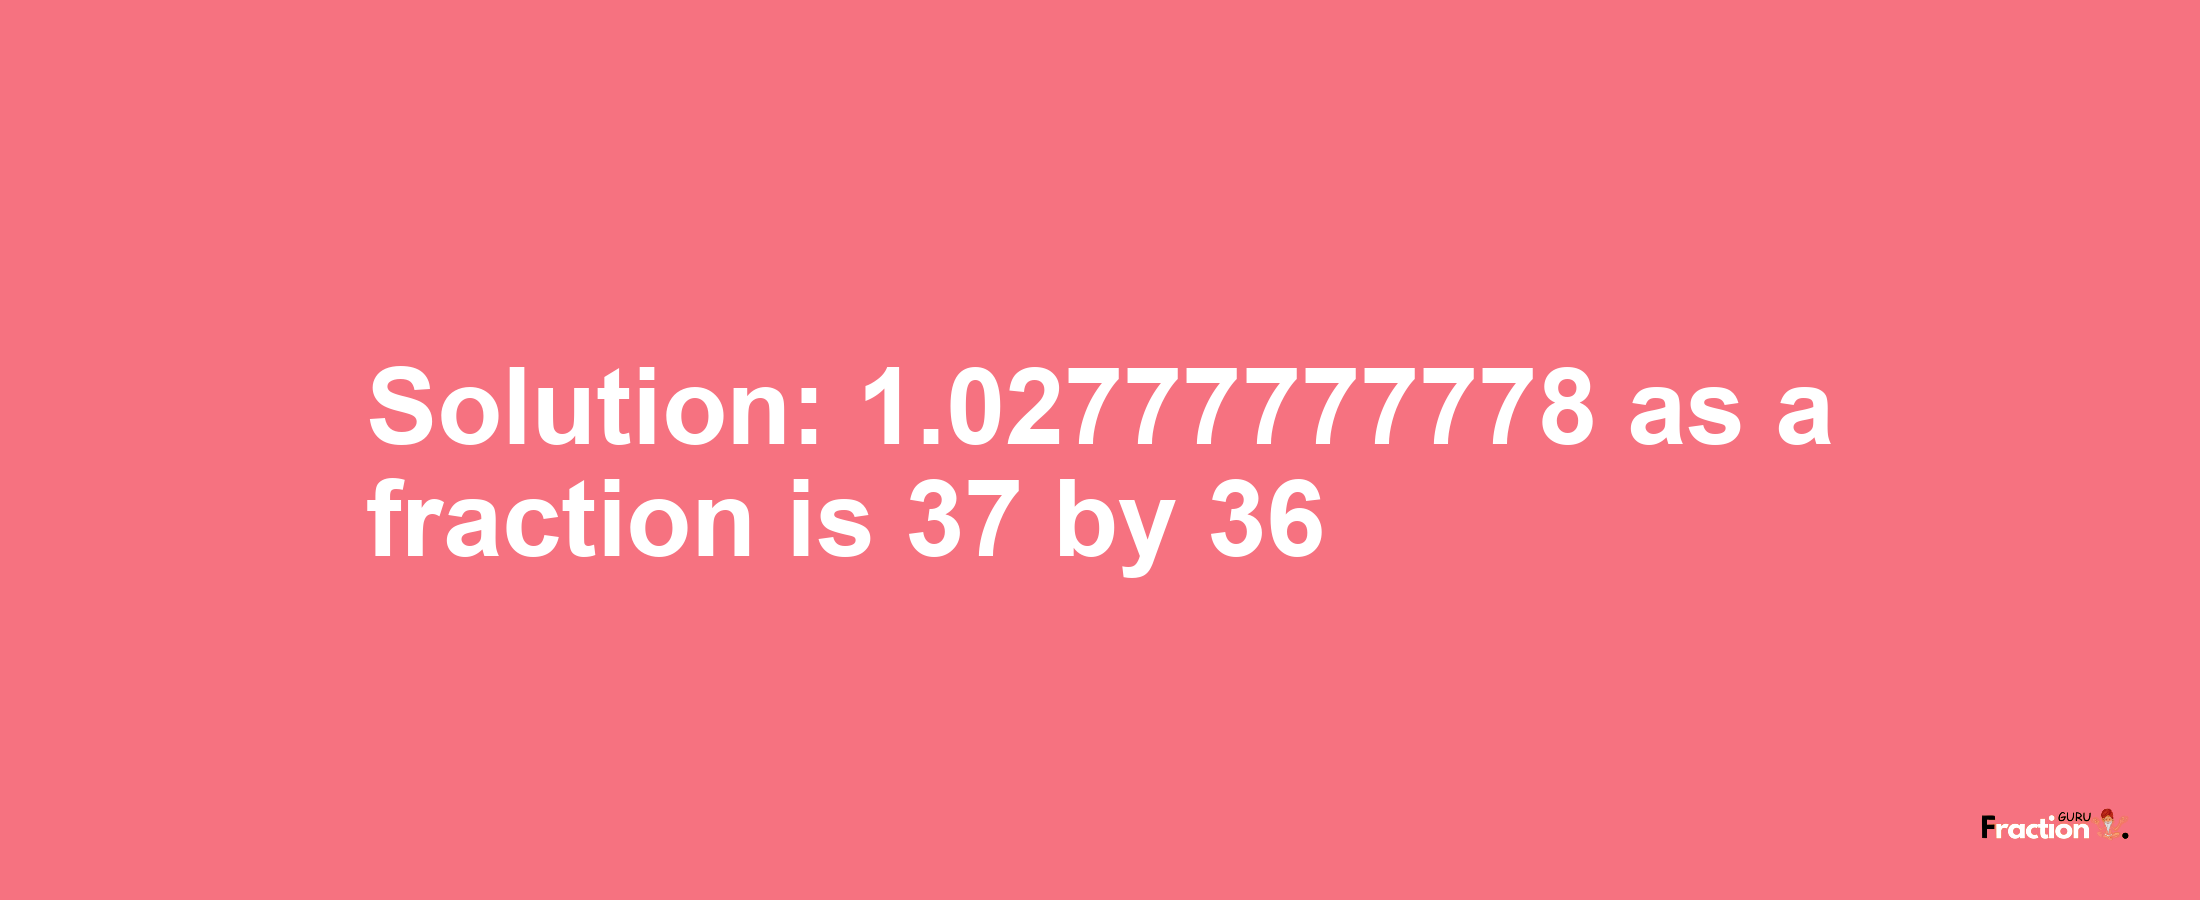 Solution:1.02777777778 as a fraction is 37/36